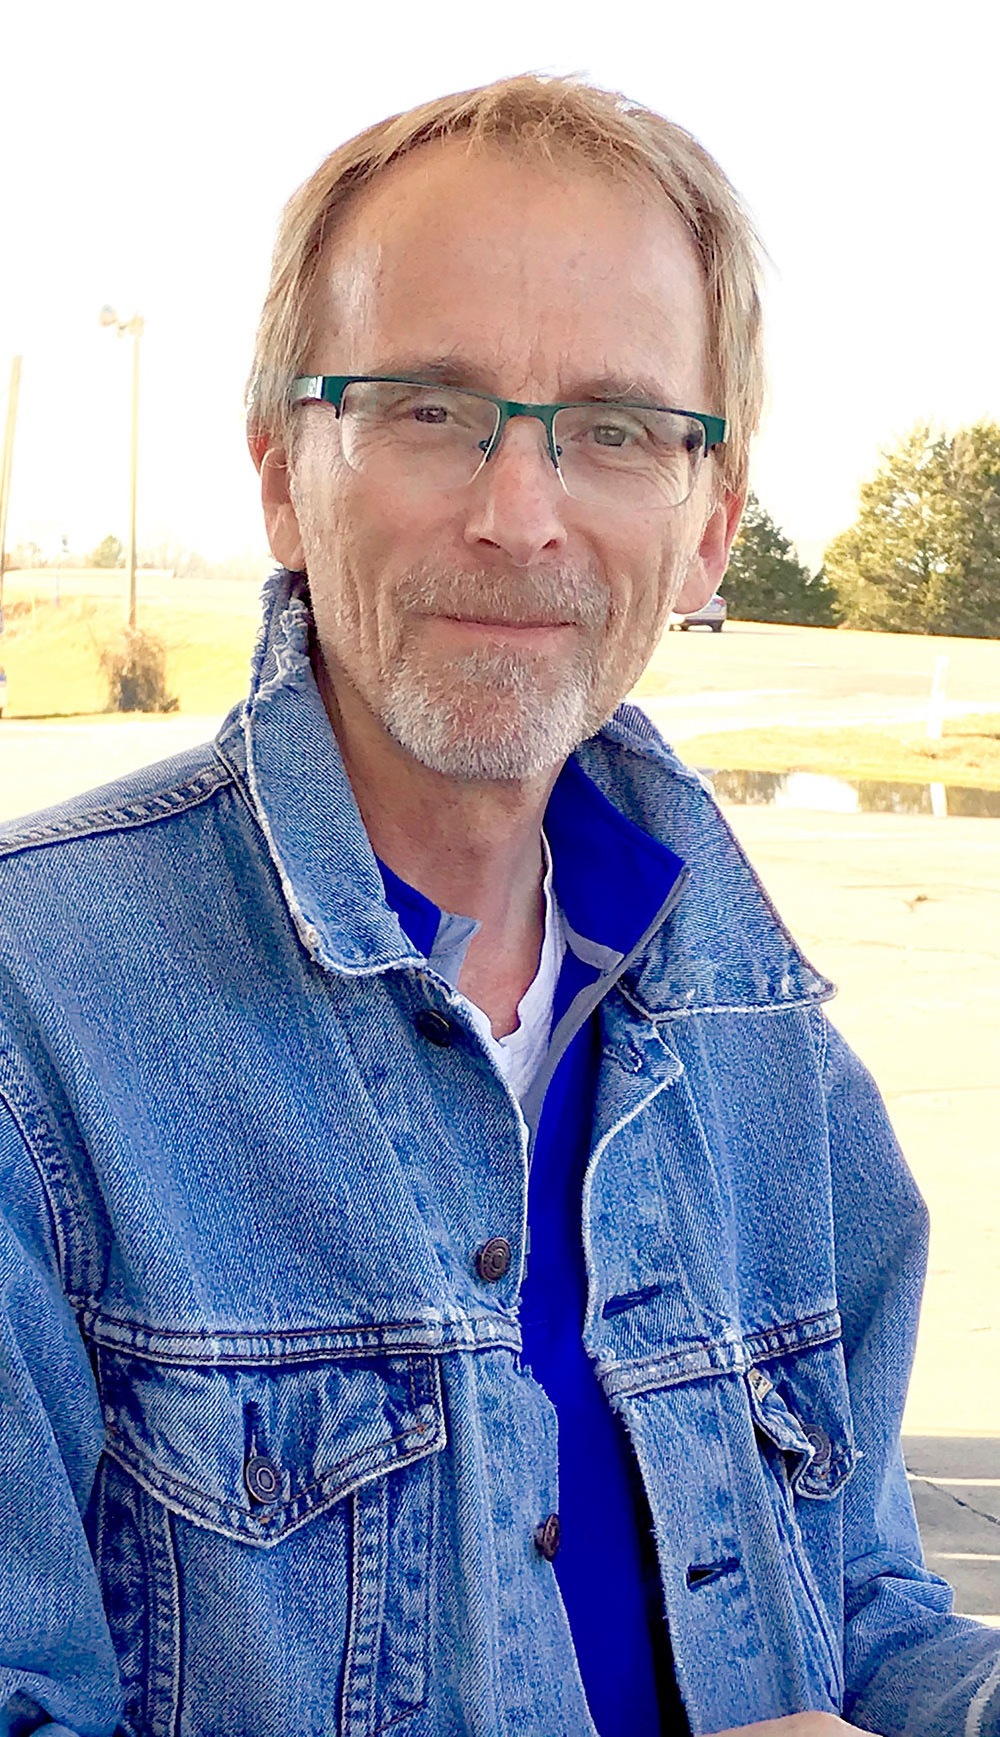 Man with glasses and denim jacket smiling at camera